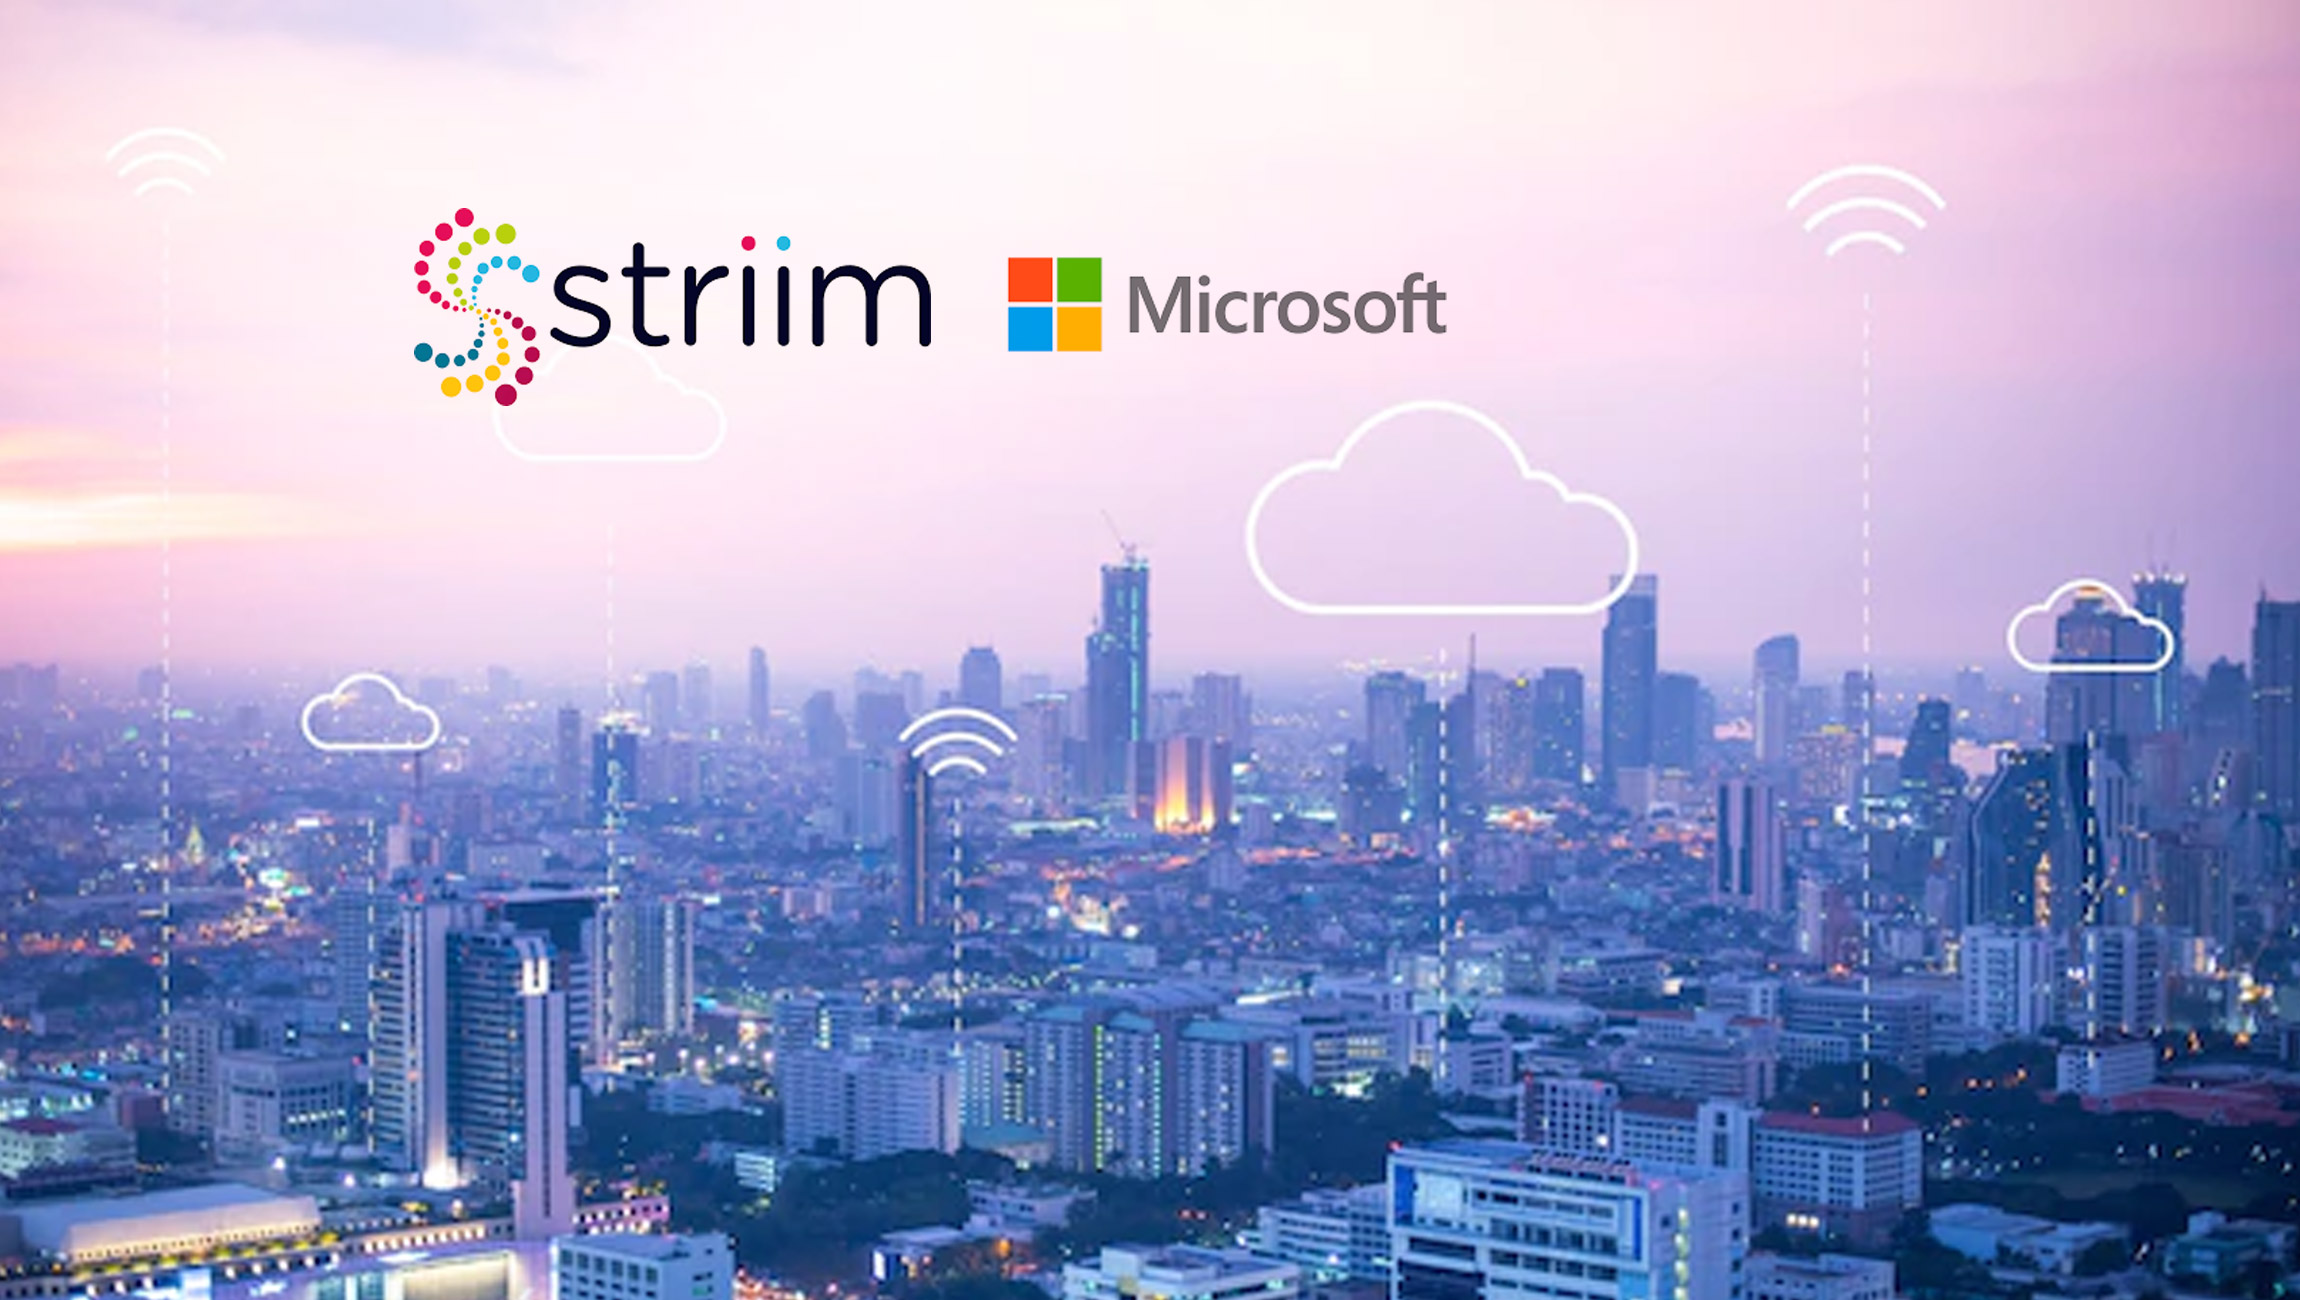 Striim Joins Forces With Microsoft to Speed Cloud and Digital Transformation